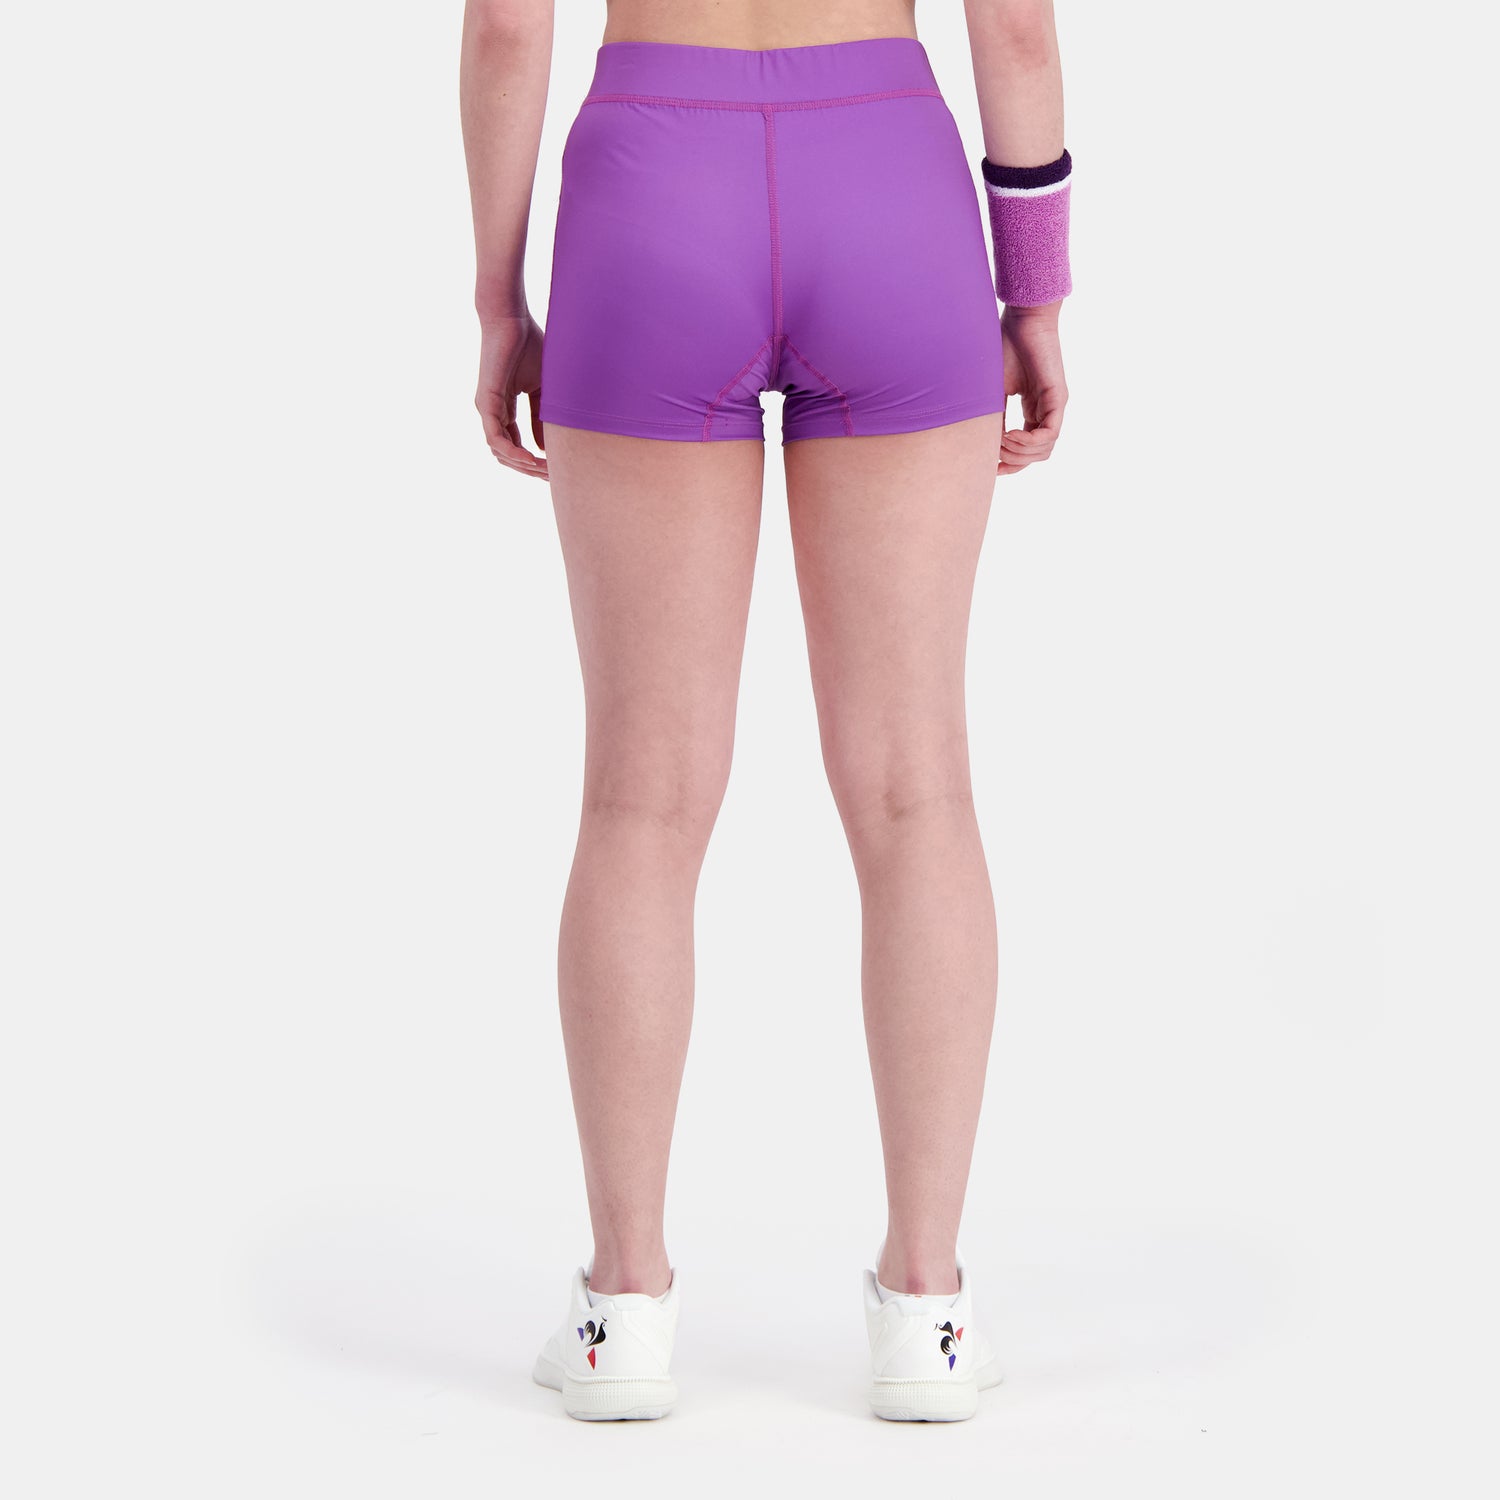 2410534-TENNIS PRO Short 24 N°1 W chive blossom  | Shorts for women